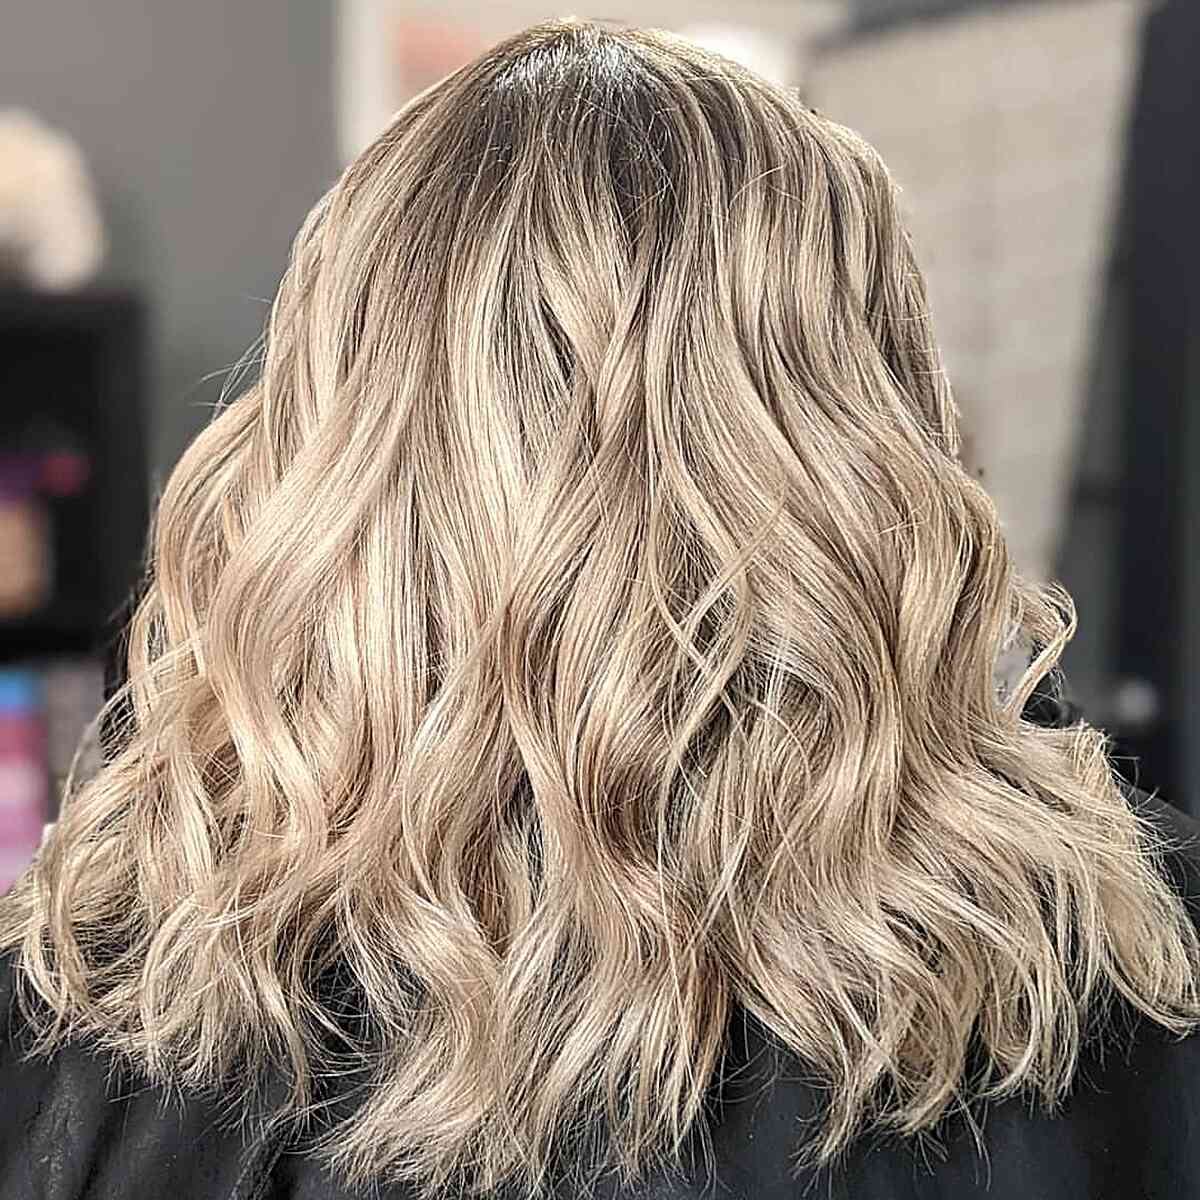 Rich Creamy Warm Blonde Balayage for Dark Roots and Mid-Length Cut